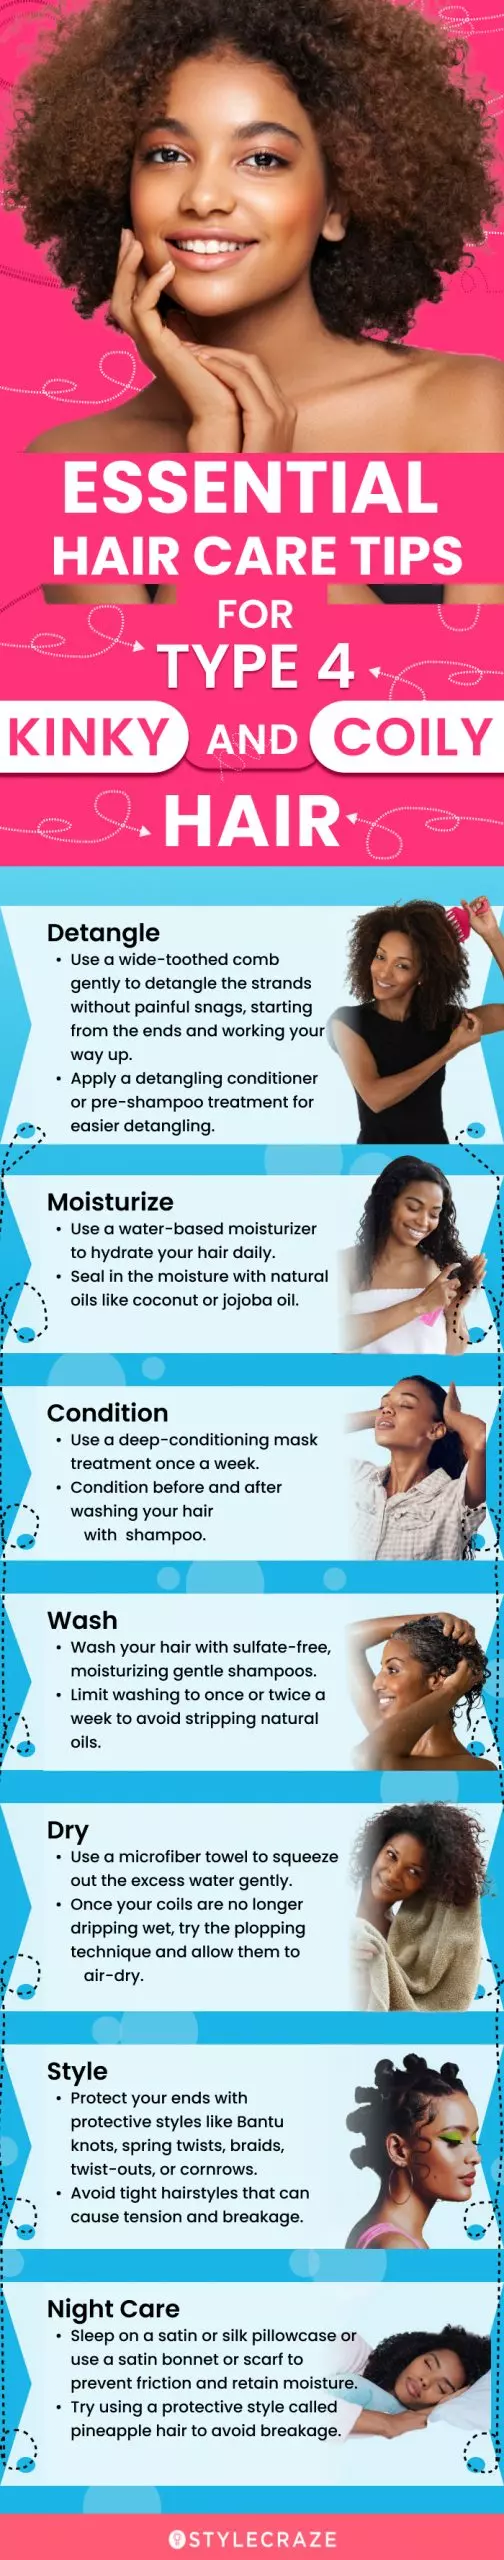 Essential Haircare Tips For Type 4 Kinky (infographic)